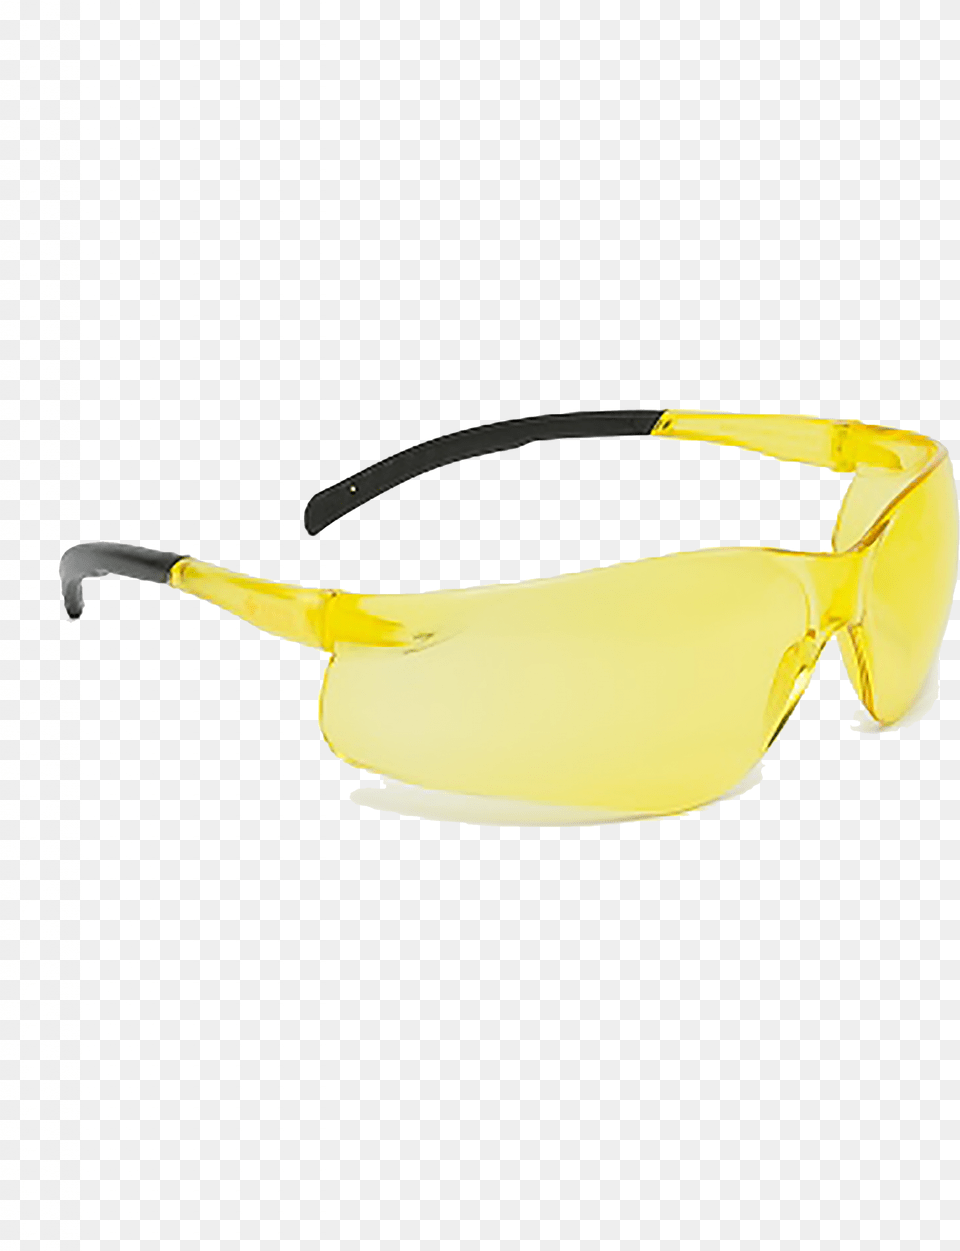 Safety Glasses Fish, Accessories, Goggles, Sunglasses Png Image